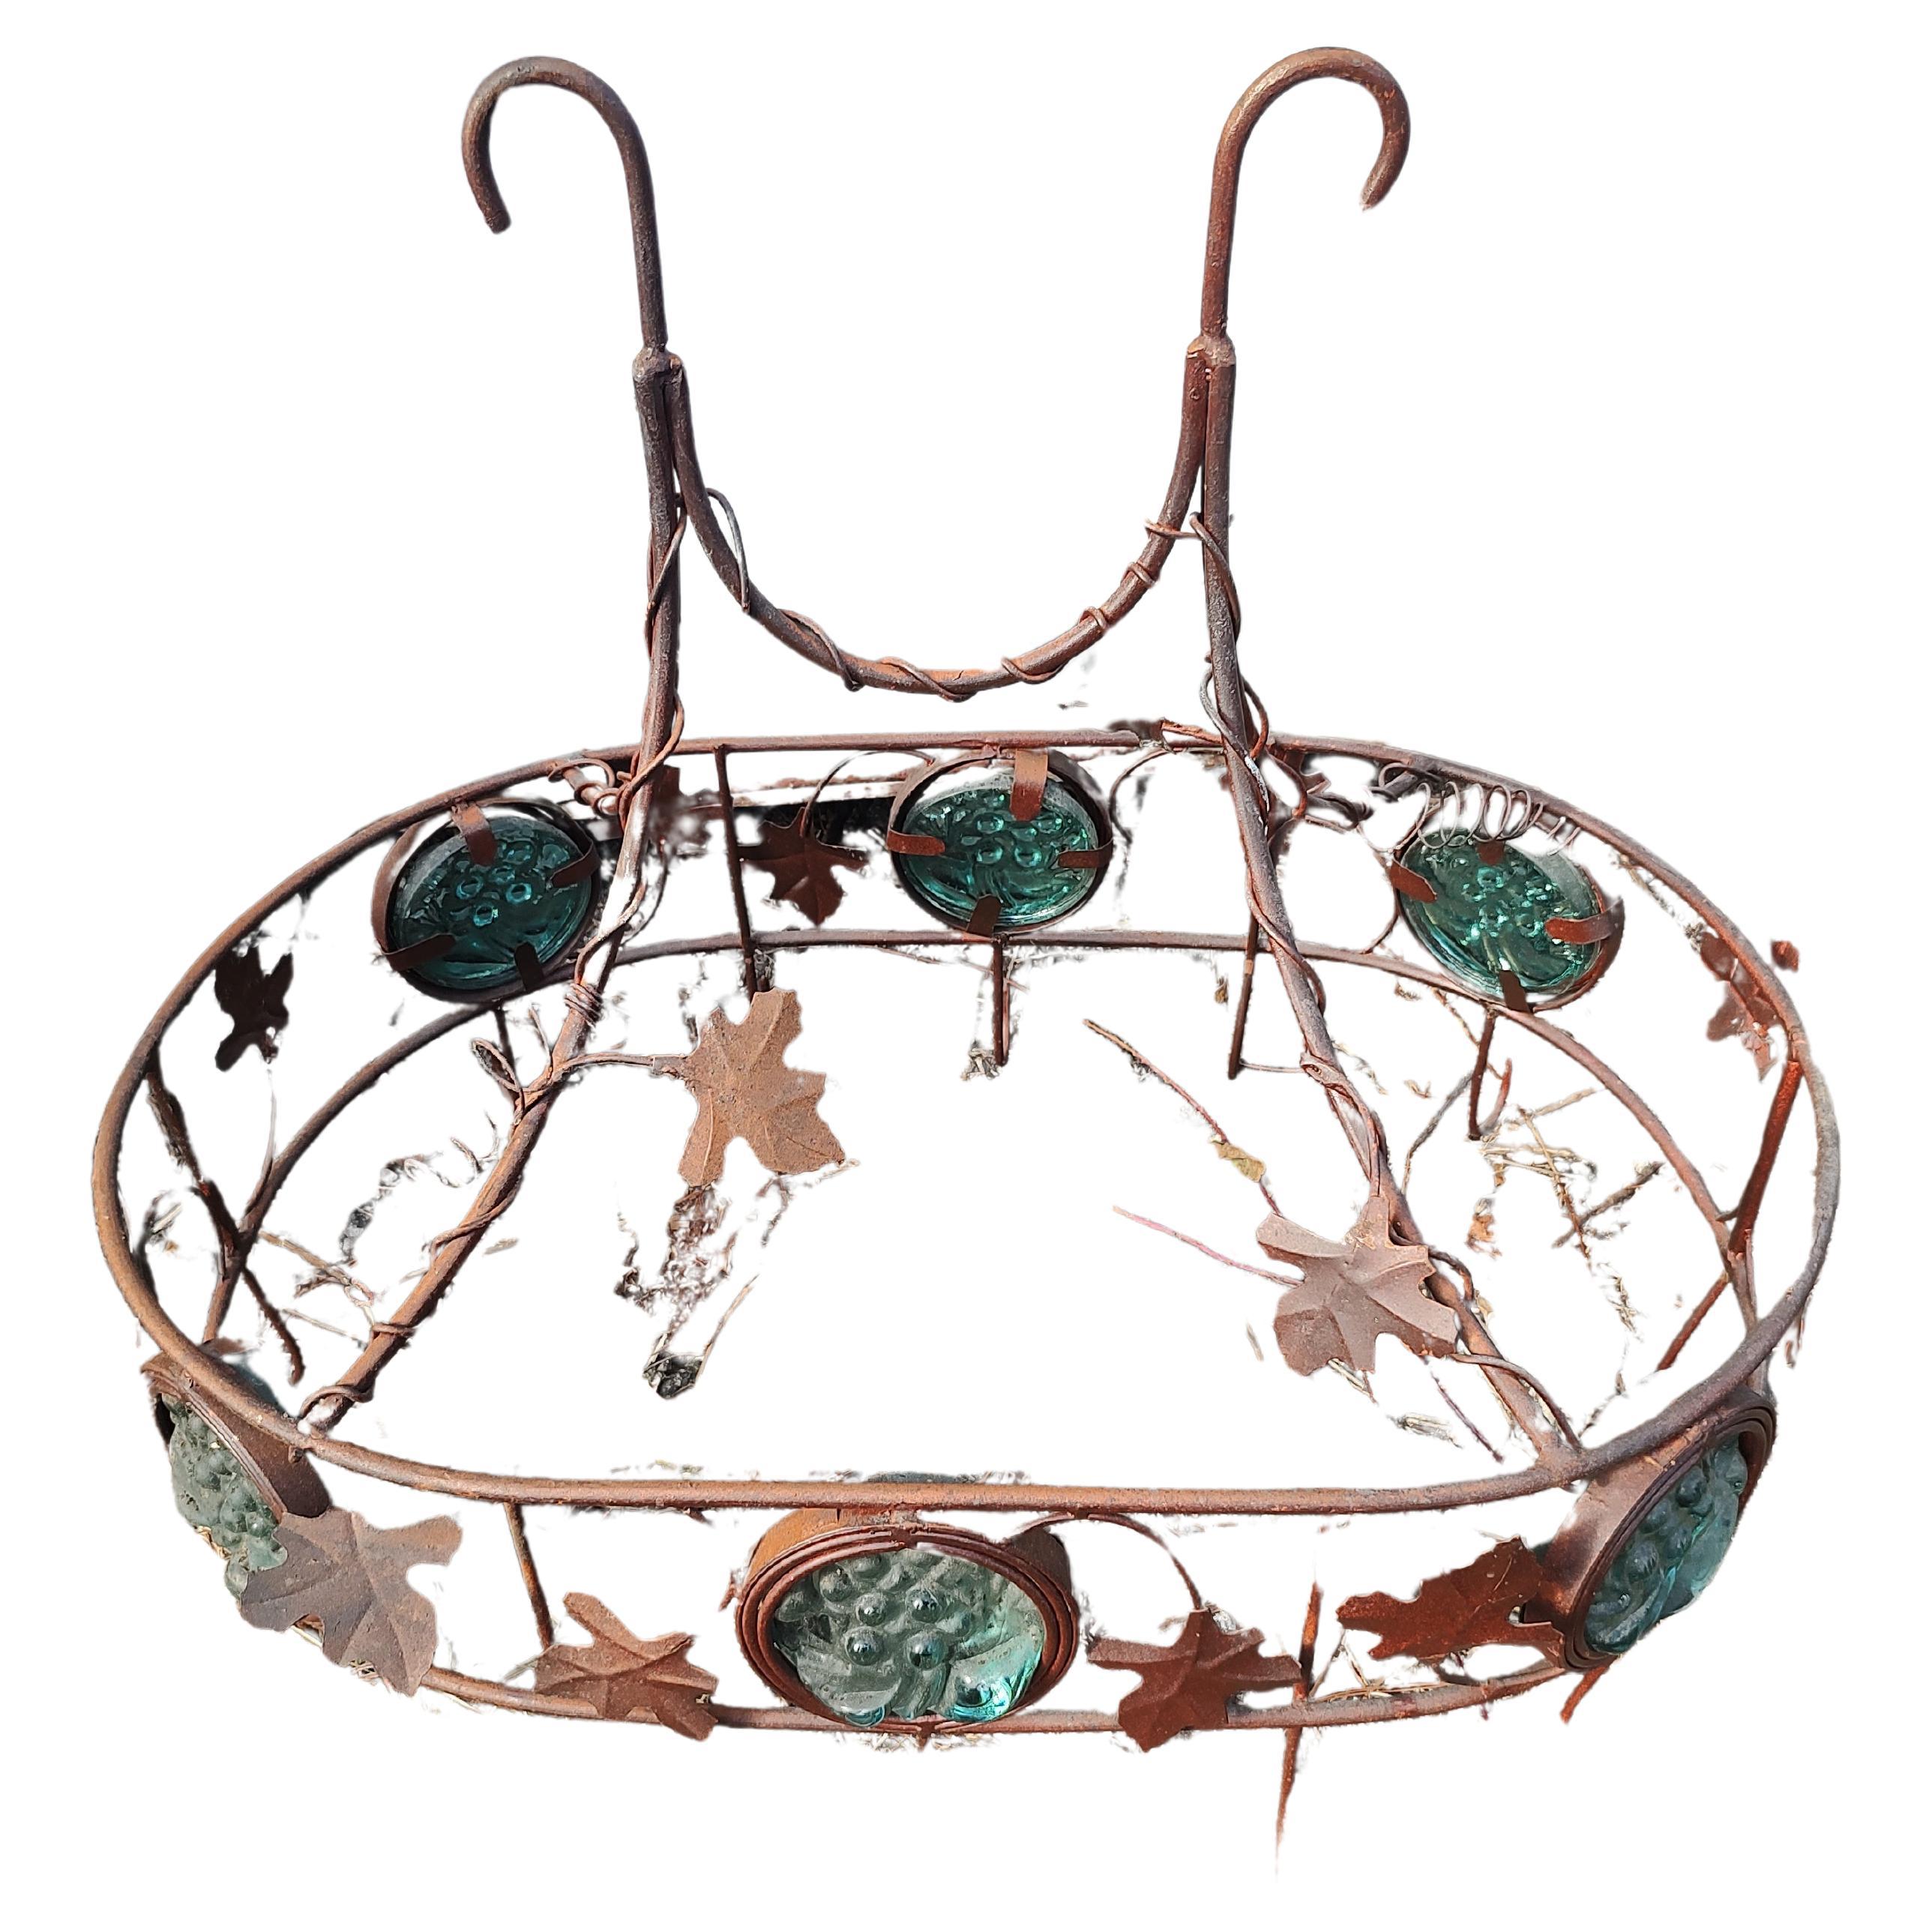 American Wrought Iron with Decorative Stained Glass Panels Hanging Pot Rack For Sale